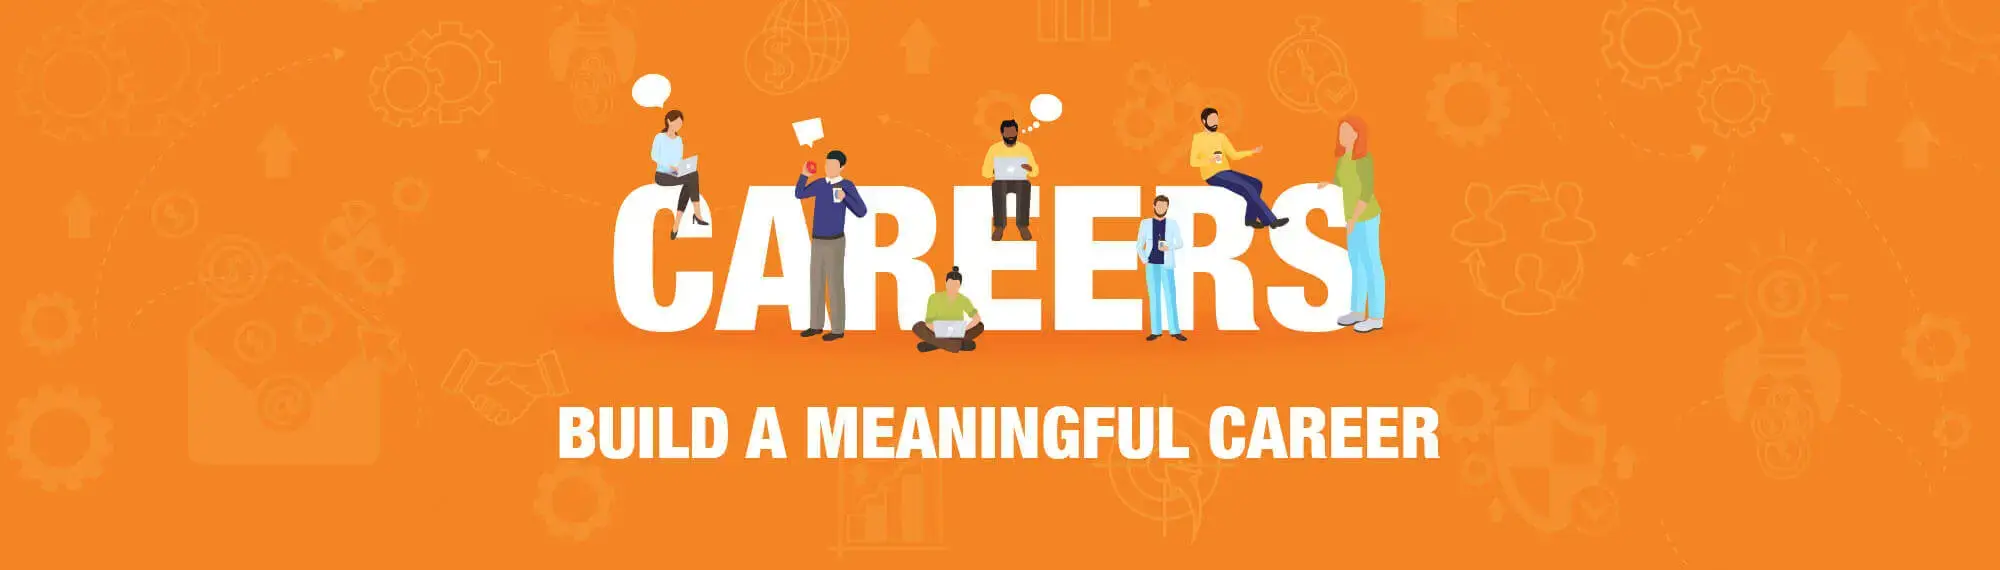 careers-banner